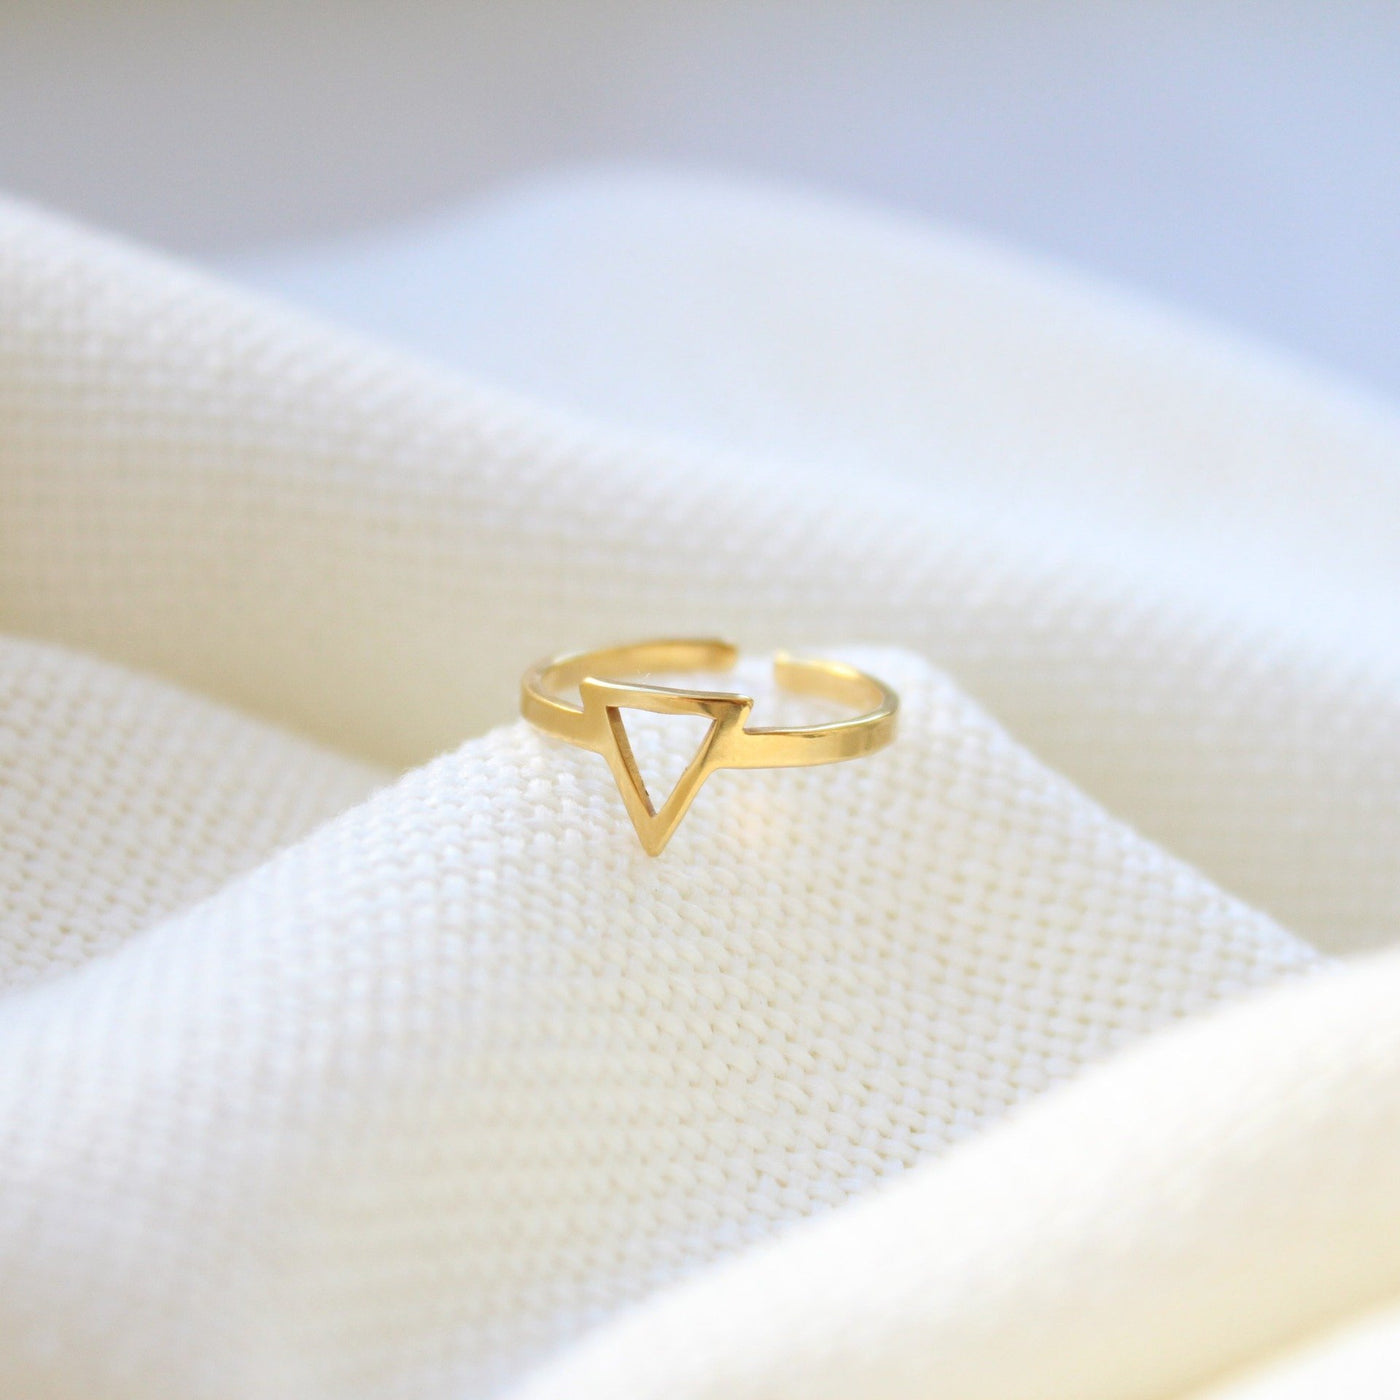 Triangle Ring - Maral Kunst Jewelry